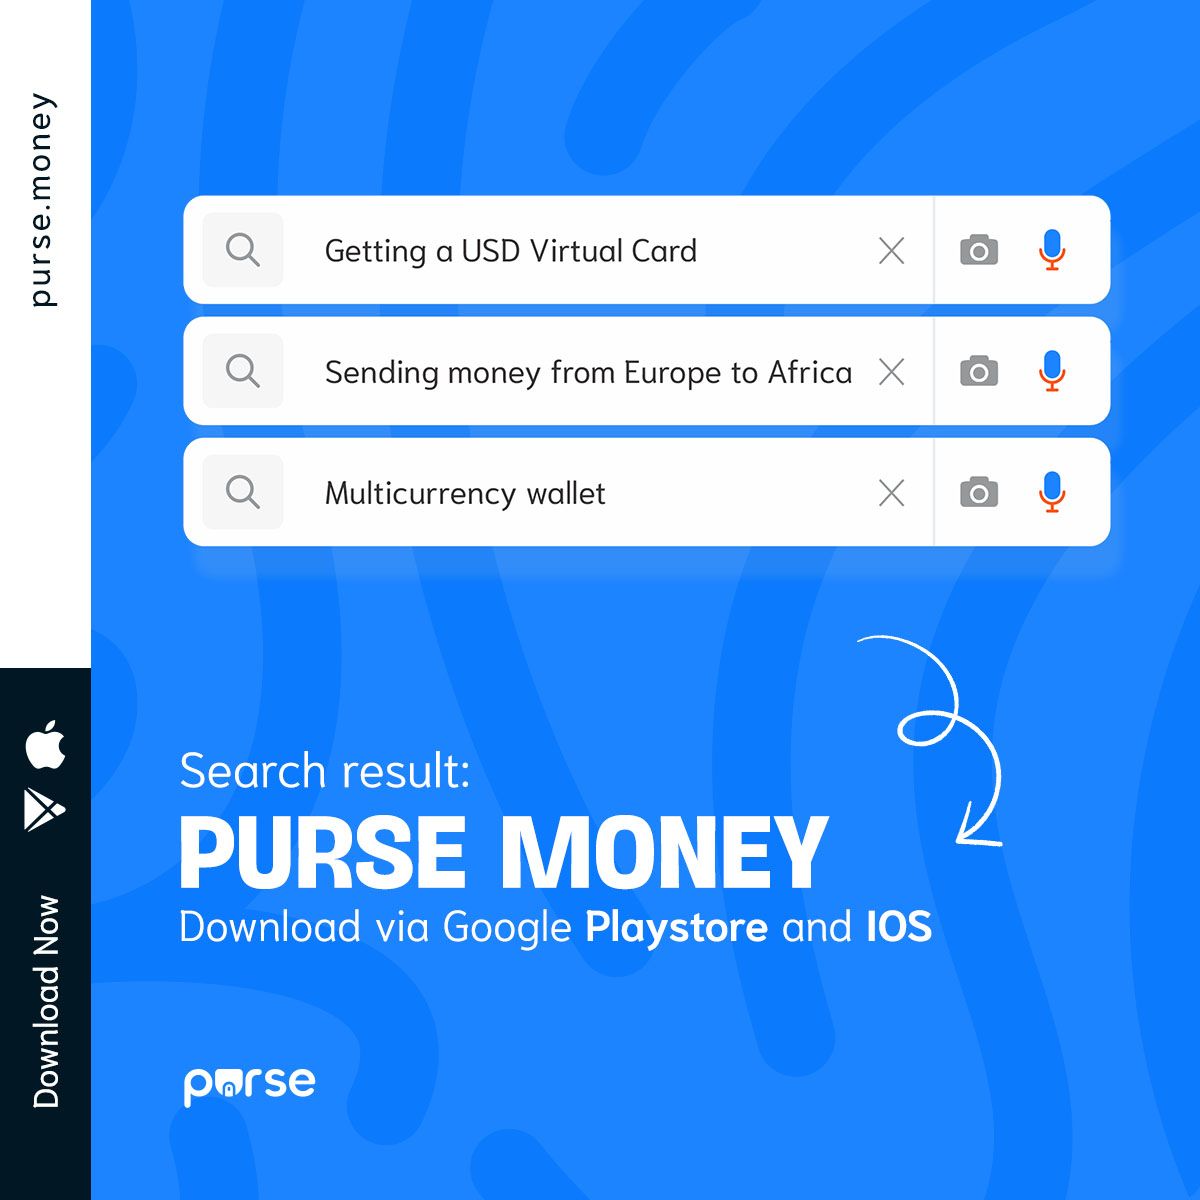 Your quest for financial freedom ends here! 
Unlock all the features you require with a Purse Money account today! 💥 
Discover the power of our USD virtual card, multicurrency wallet, and seamless money transfers. 
Download the mobile app today
#PurseMoney #USDVirtualCard